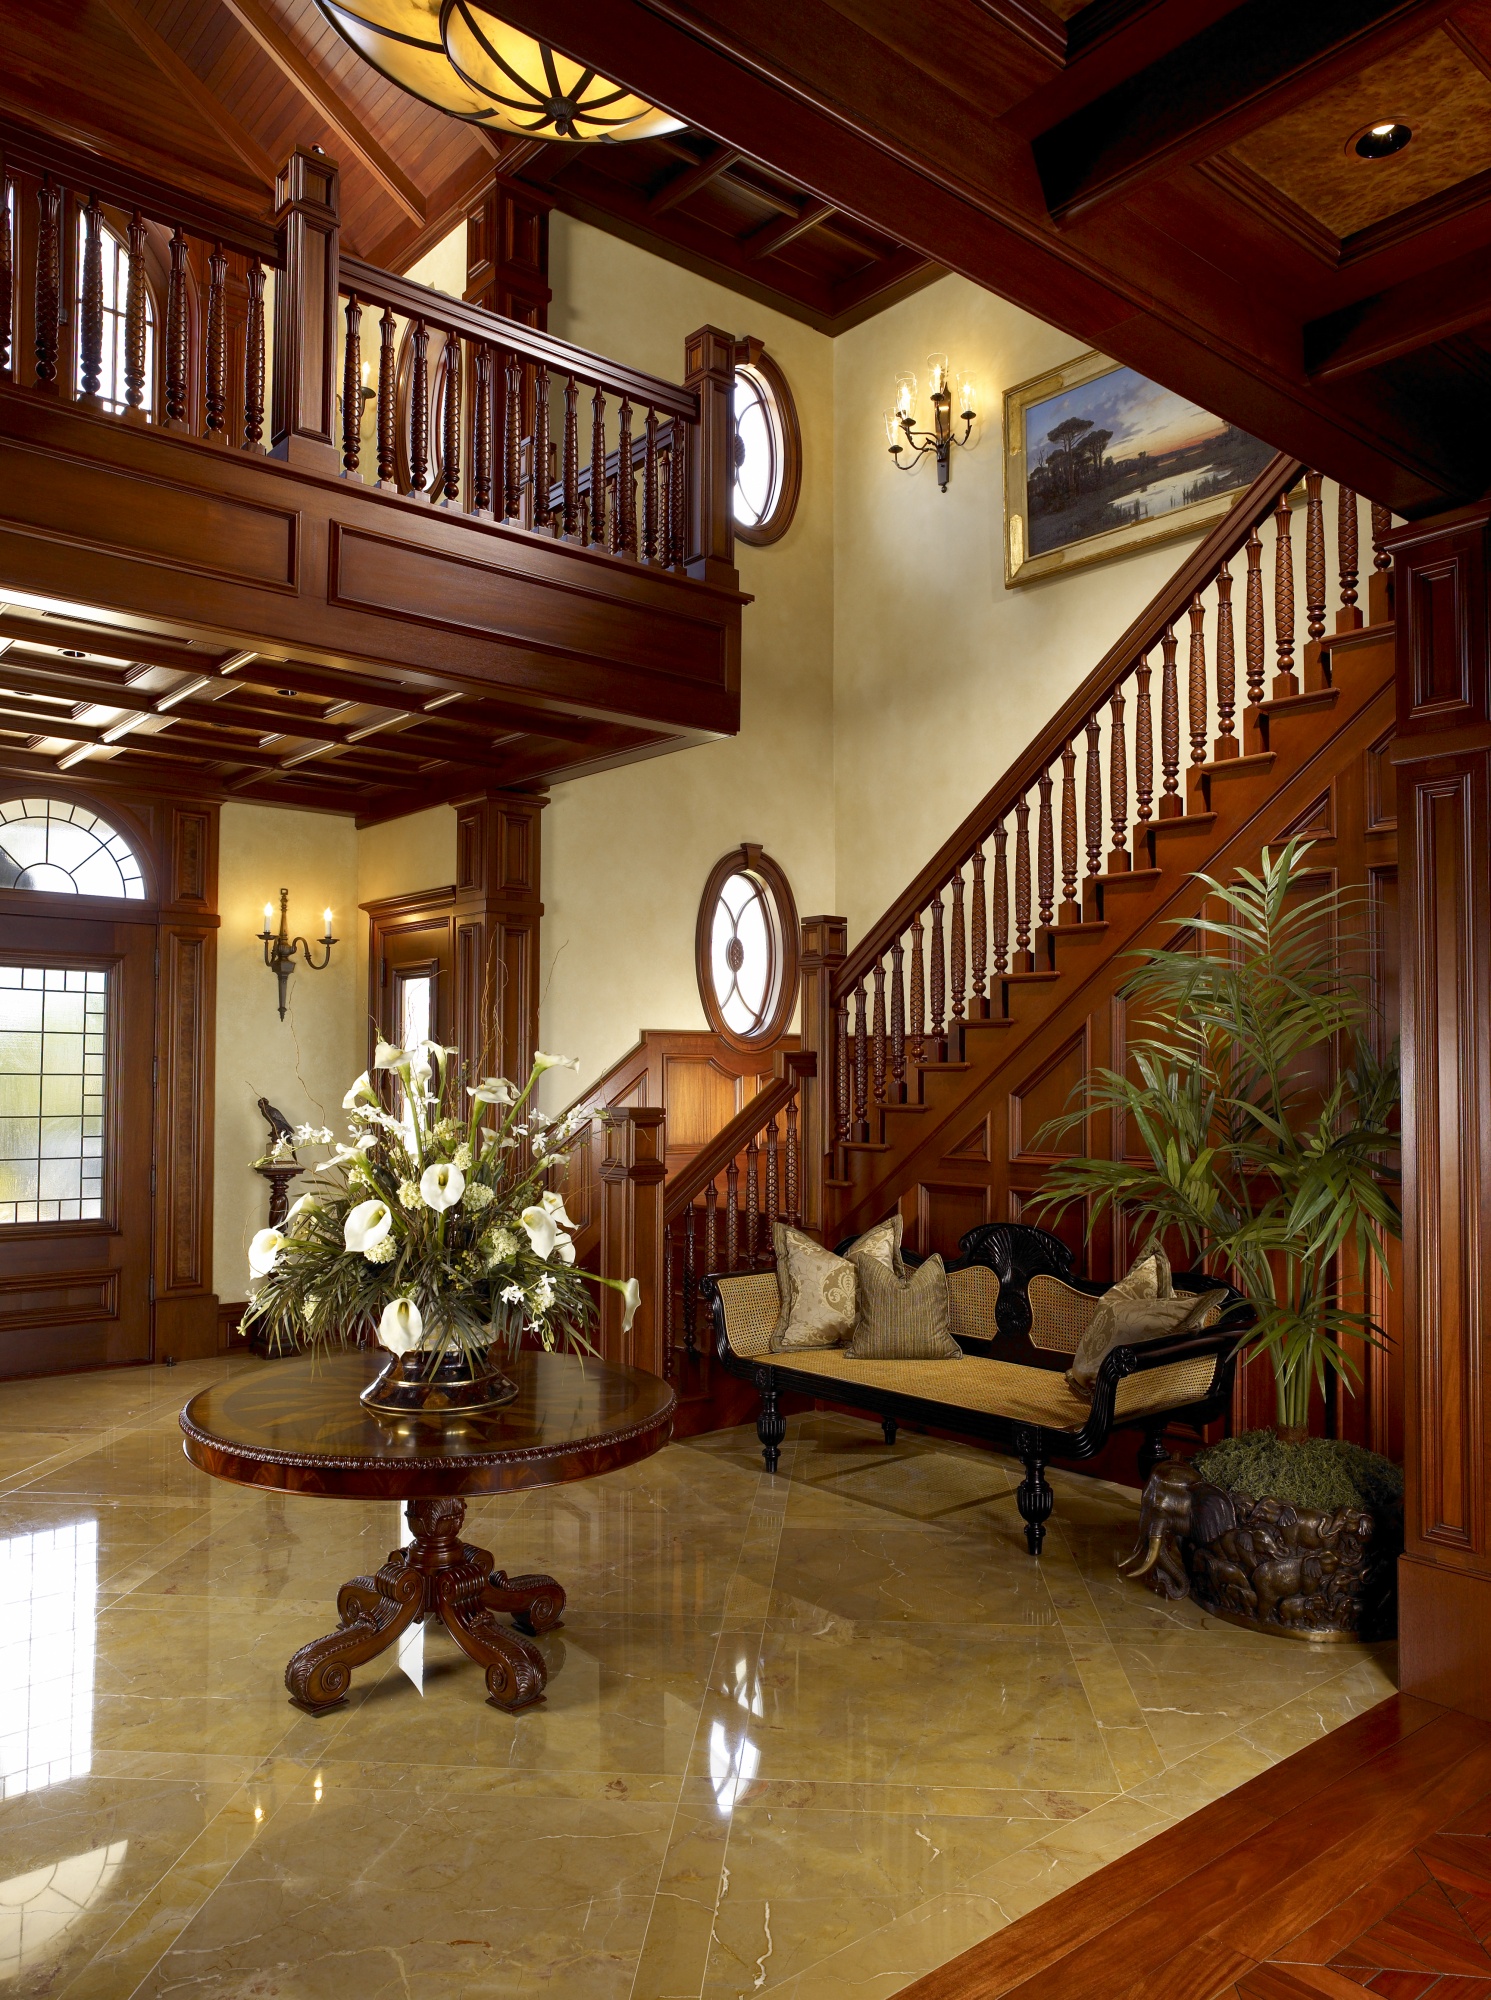 Hand carved mahogany banisters provide beauty to this entry stair.